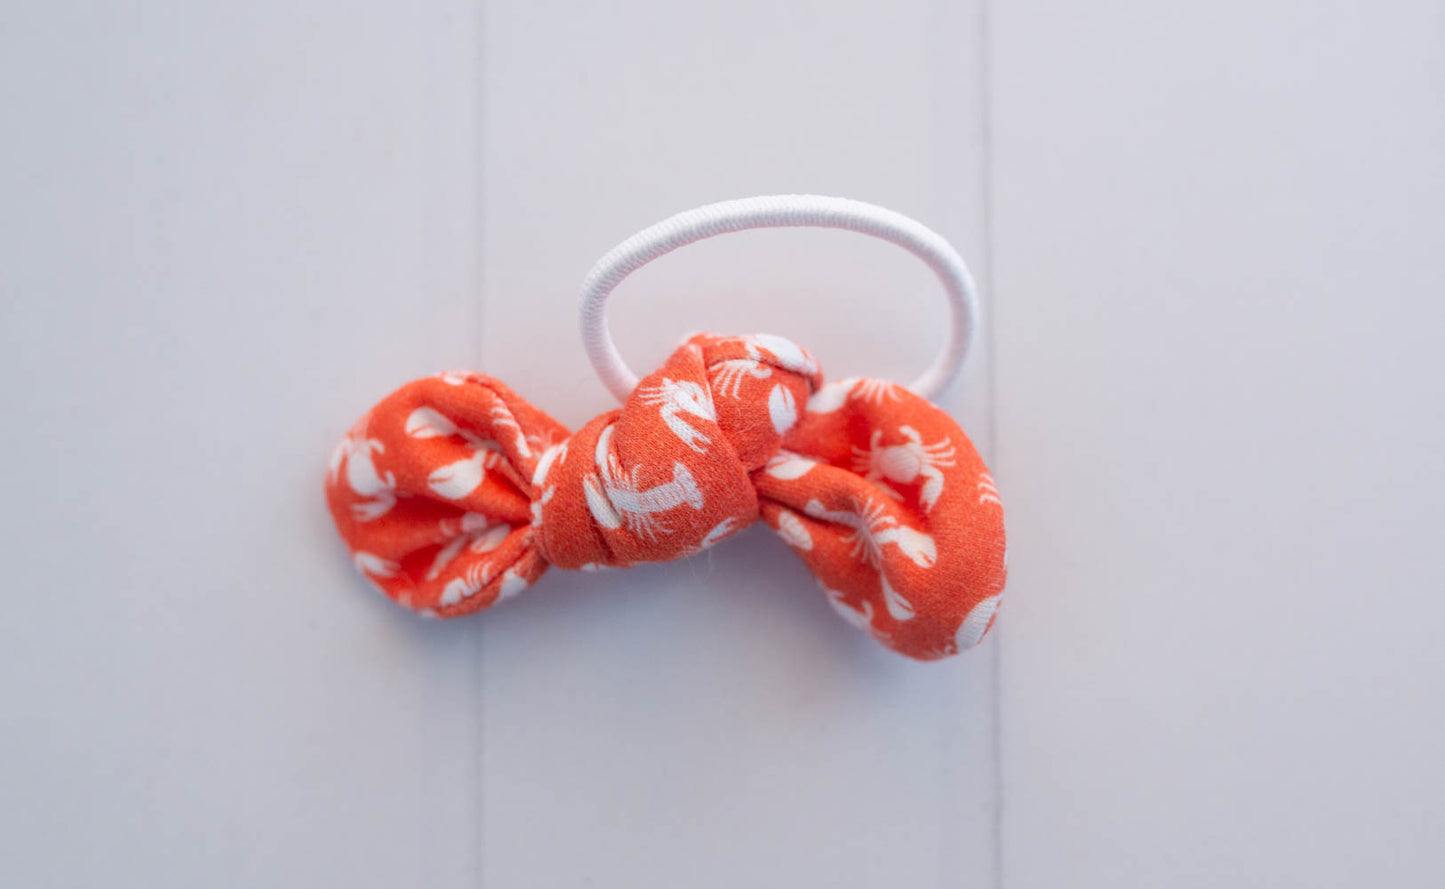 Lobster and Crab Bow Hair Tie